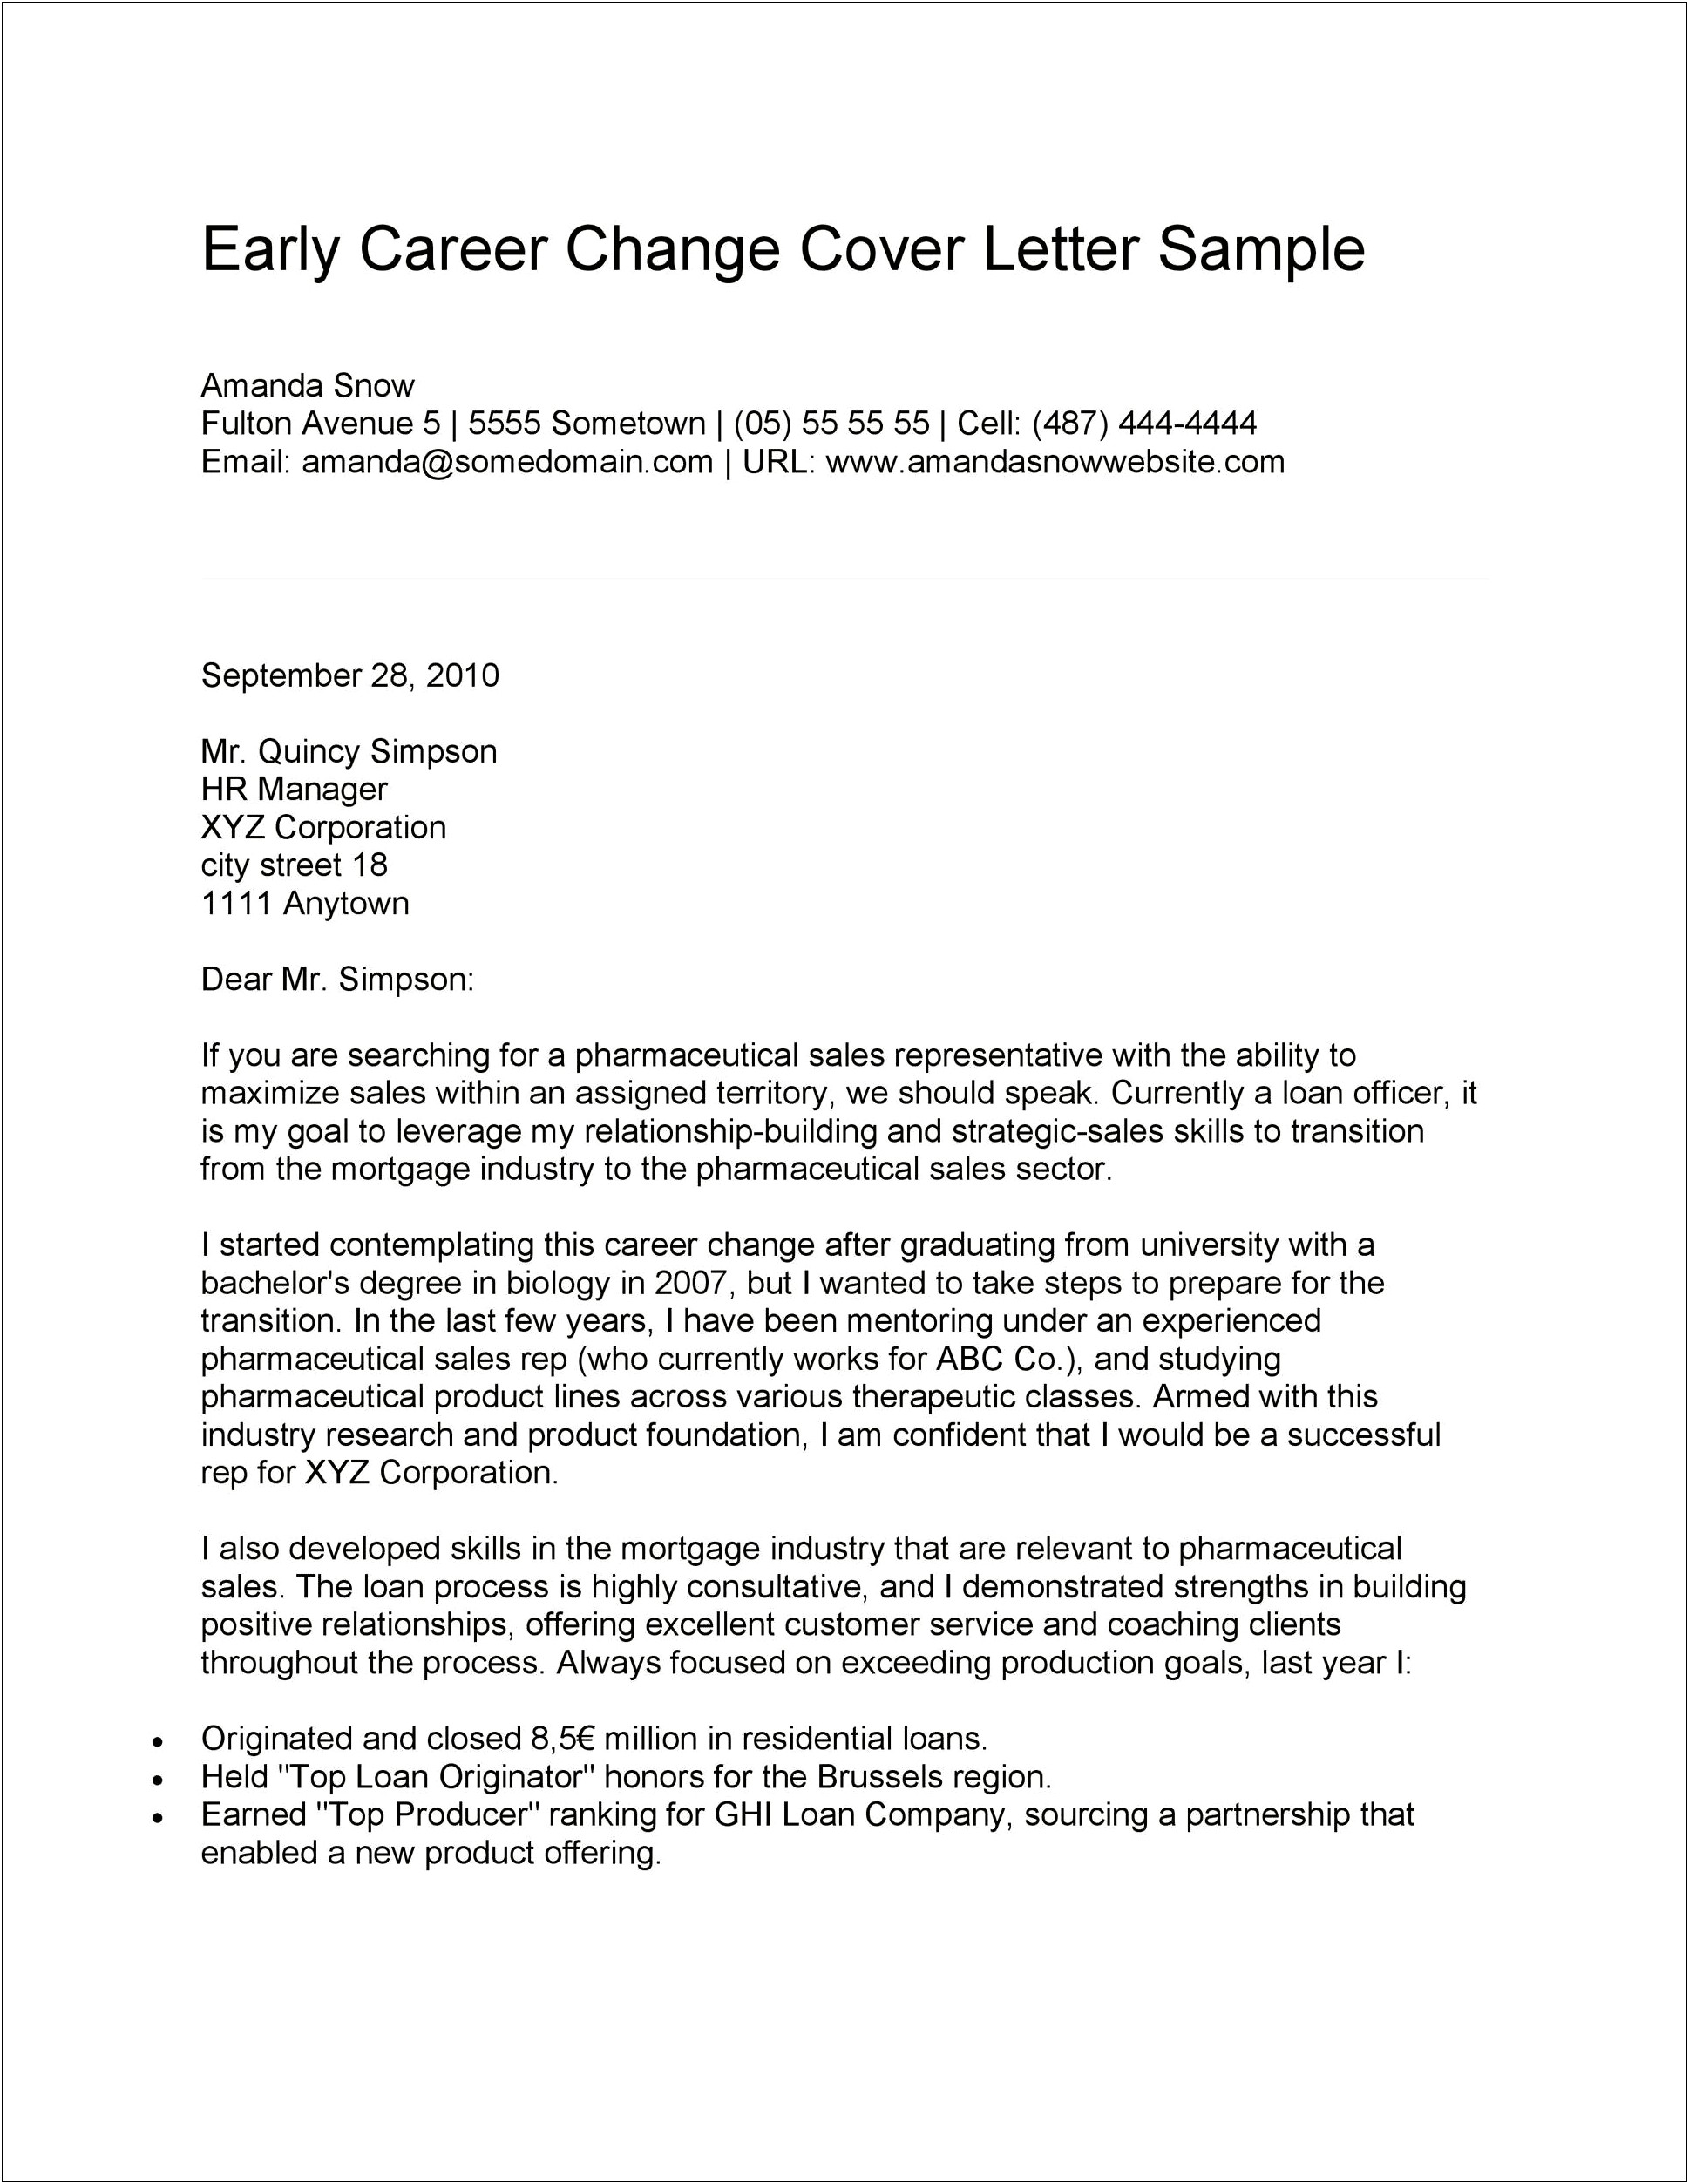 Career Change Resume Cover Letter Examples